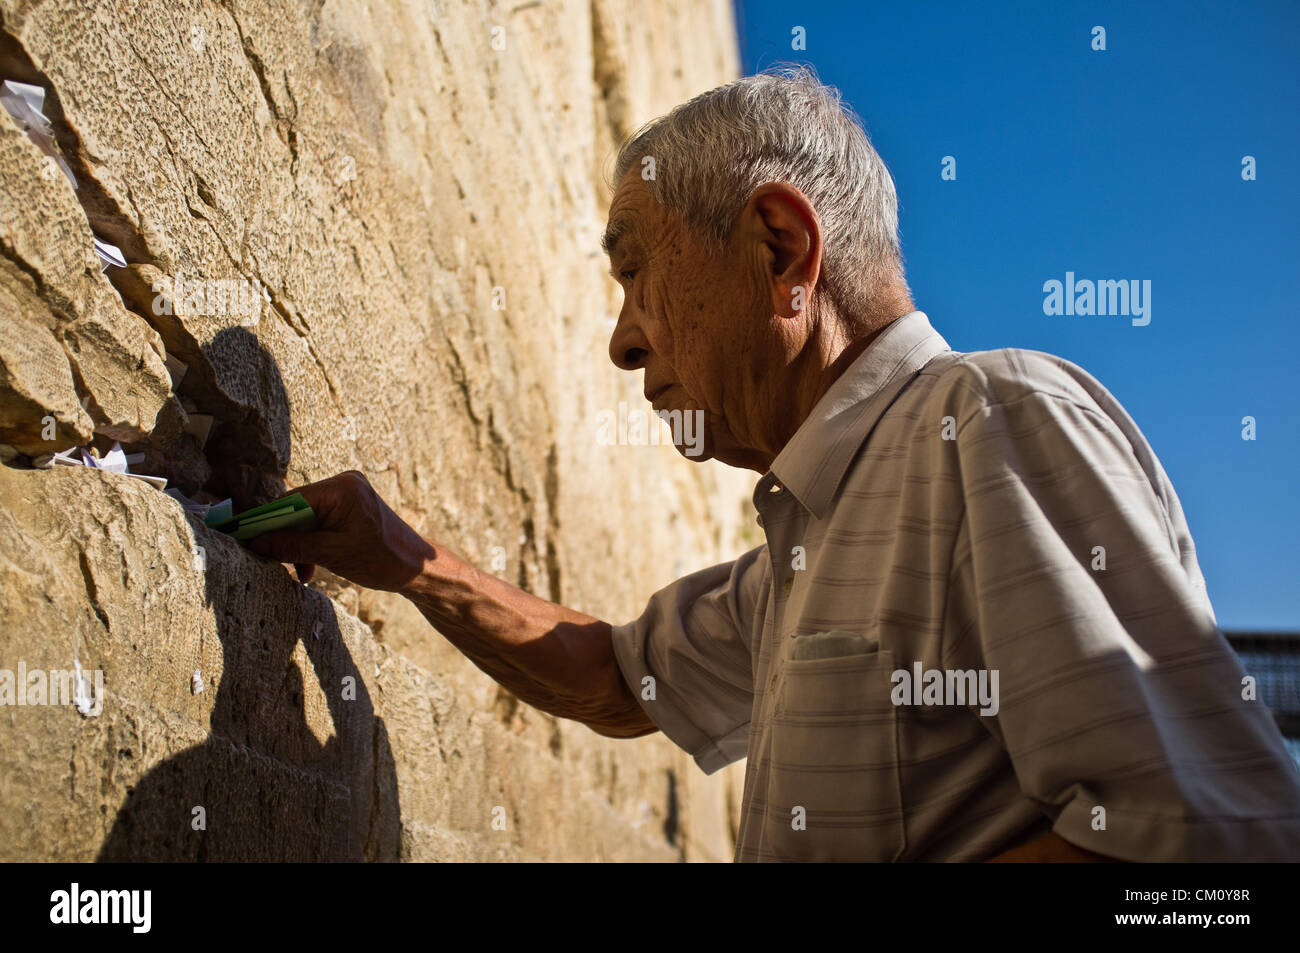 Miyake Nobuo, 83, survivor of Hiroshima at age 16, 2Km from the hypocenter, places a prayer for nuclear abolition in the crevices between the stones of the western Wall. Jerusalem, Israel. 10-September-2012.   Hibakusha, survivors of the August 6th, 1945 bombing of Hiroshima, visit Israel to promote nuclear abolition. Calling “No More Hiroshimas, No More Nagasakis!” they place their prayers between the Kotel stones. Stock Photo